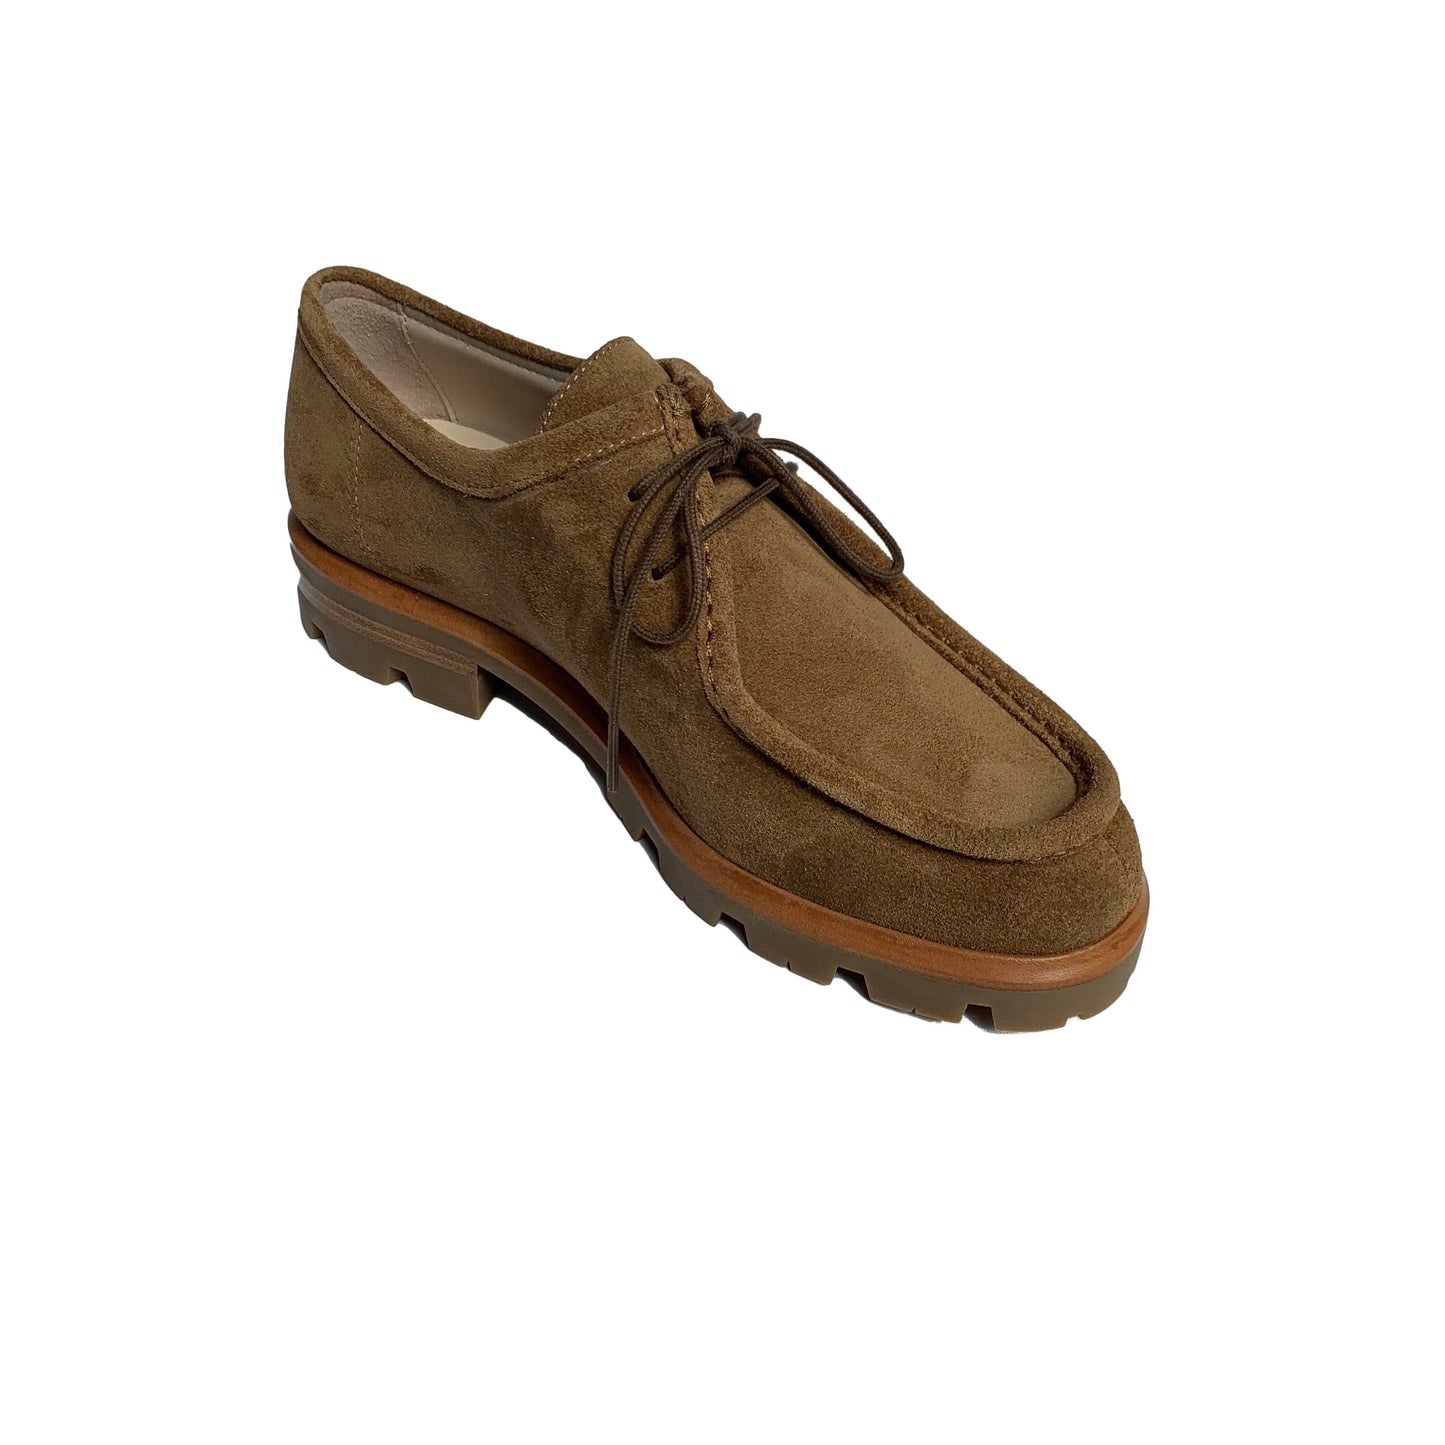 New Lace Up Derby in Camel Suede